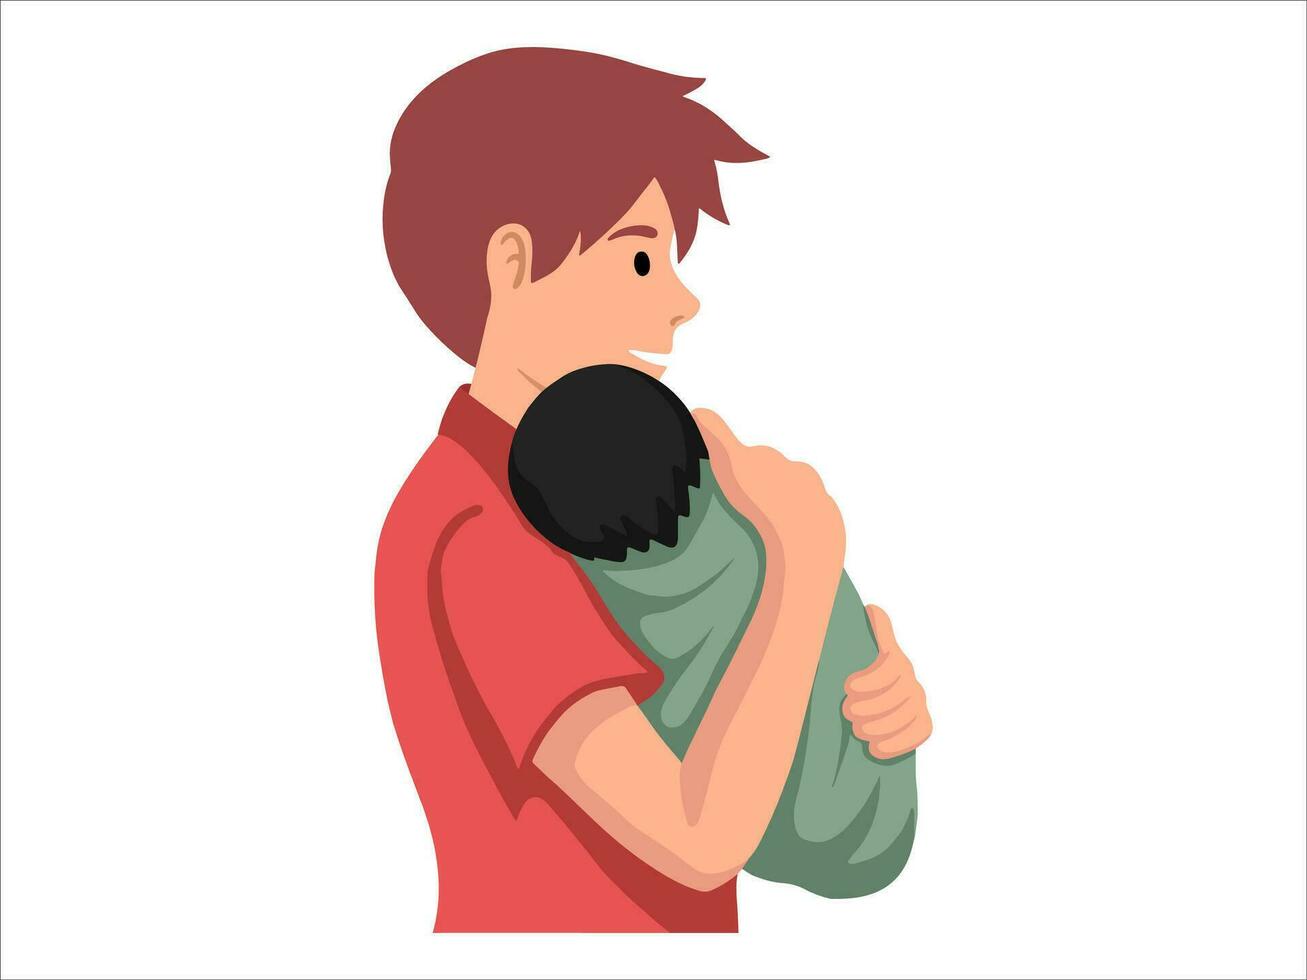 Dad holding baby or People Character illustration vector